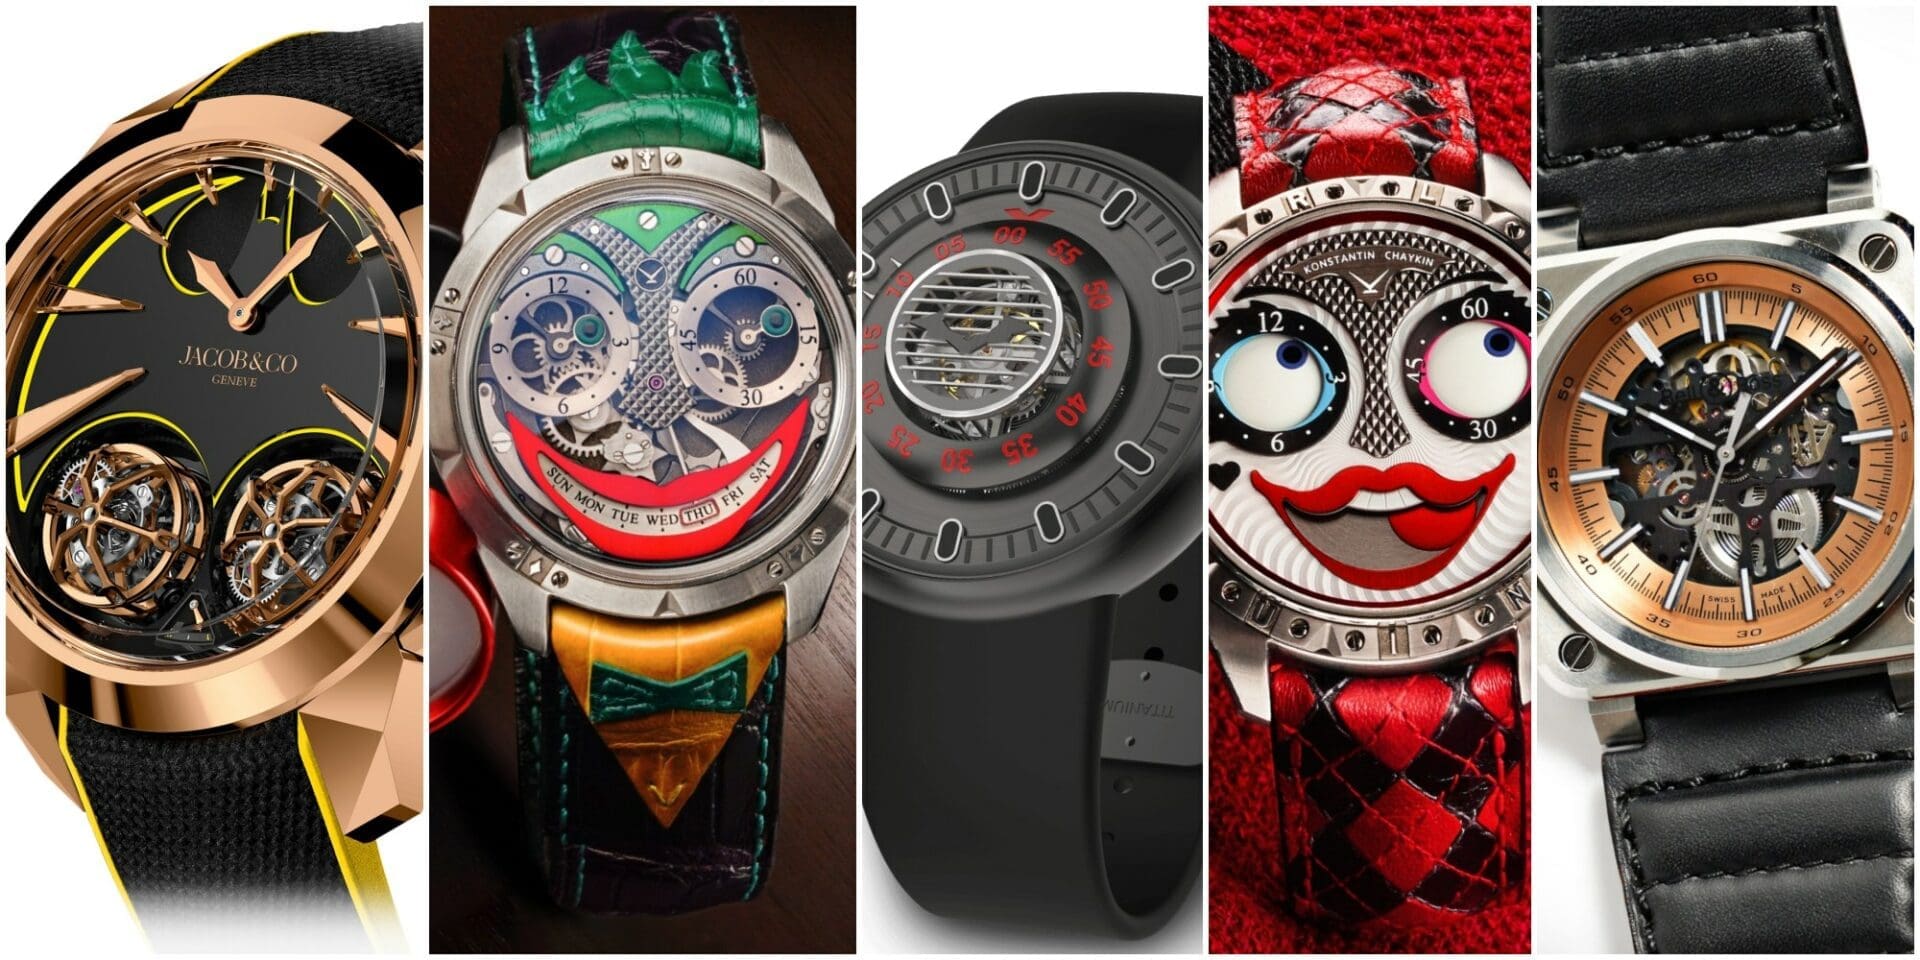 Kapow! 5 high-end watches from the Batman universe